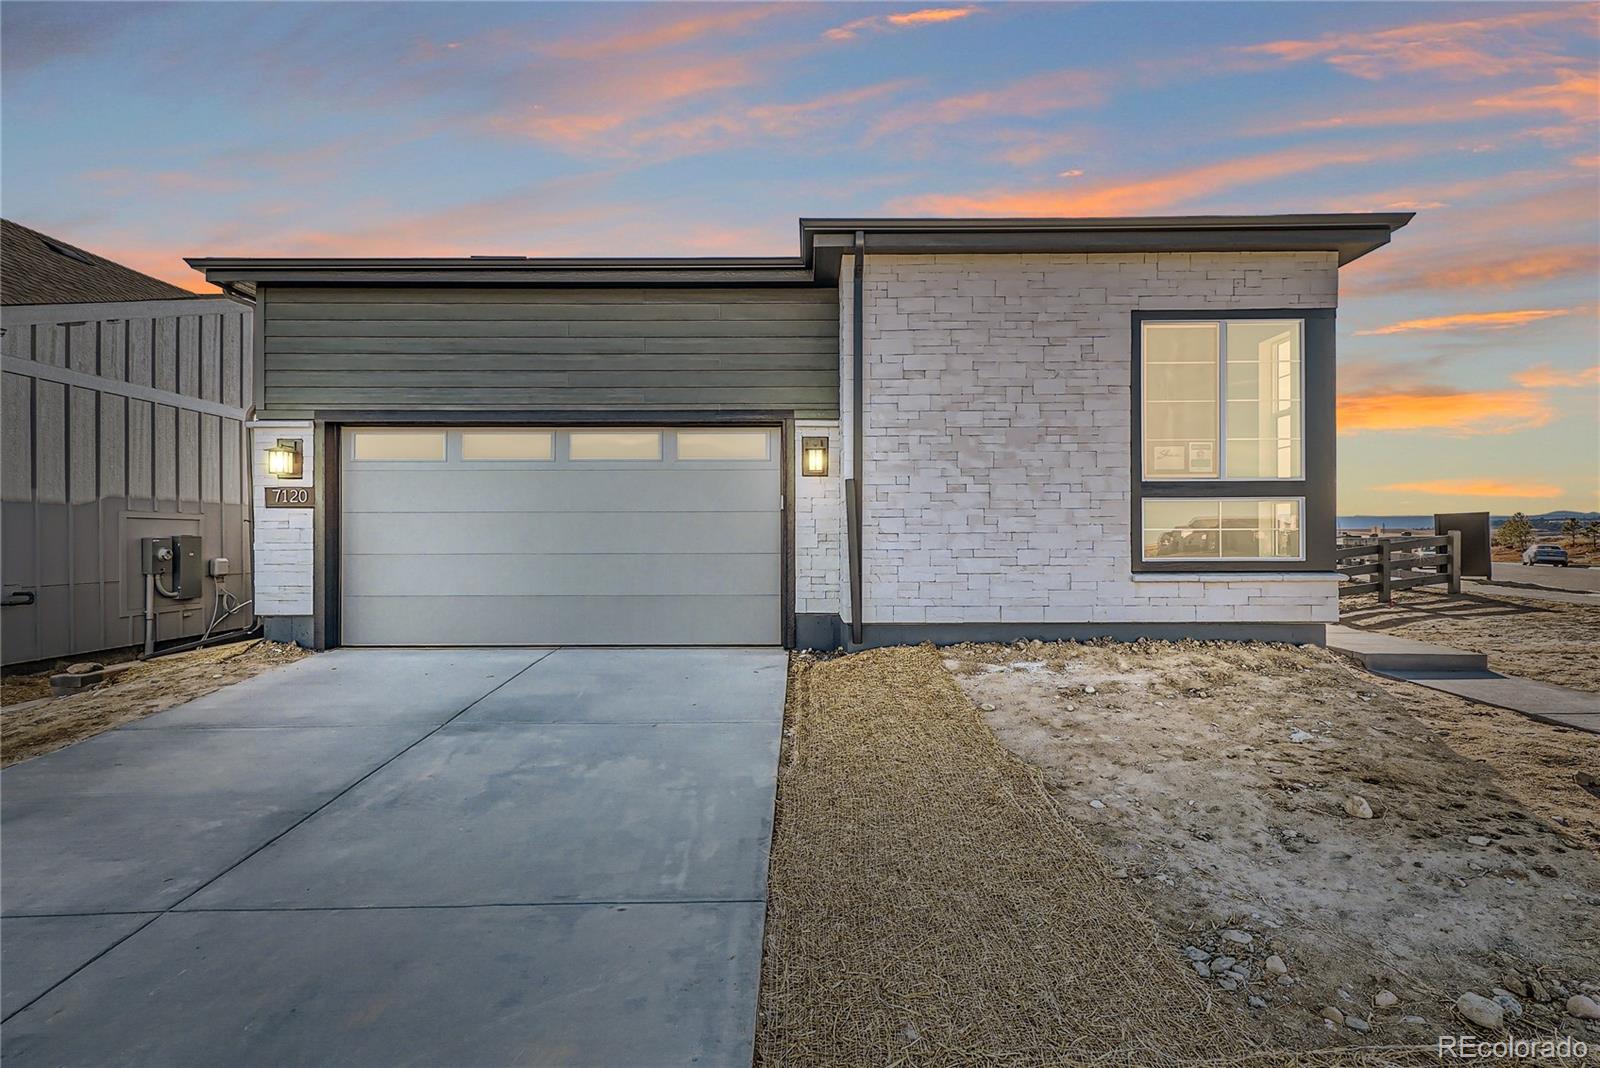 7120  Canyon Sky Trail, castle pines MLS: 7833360 Beds: 3 Baths: 4 Price: $1,128,990